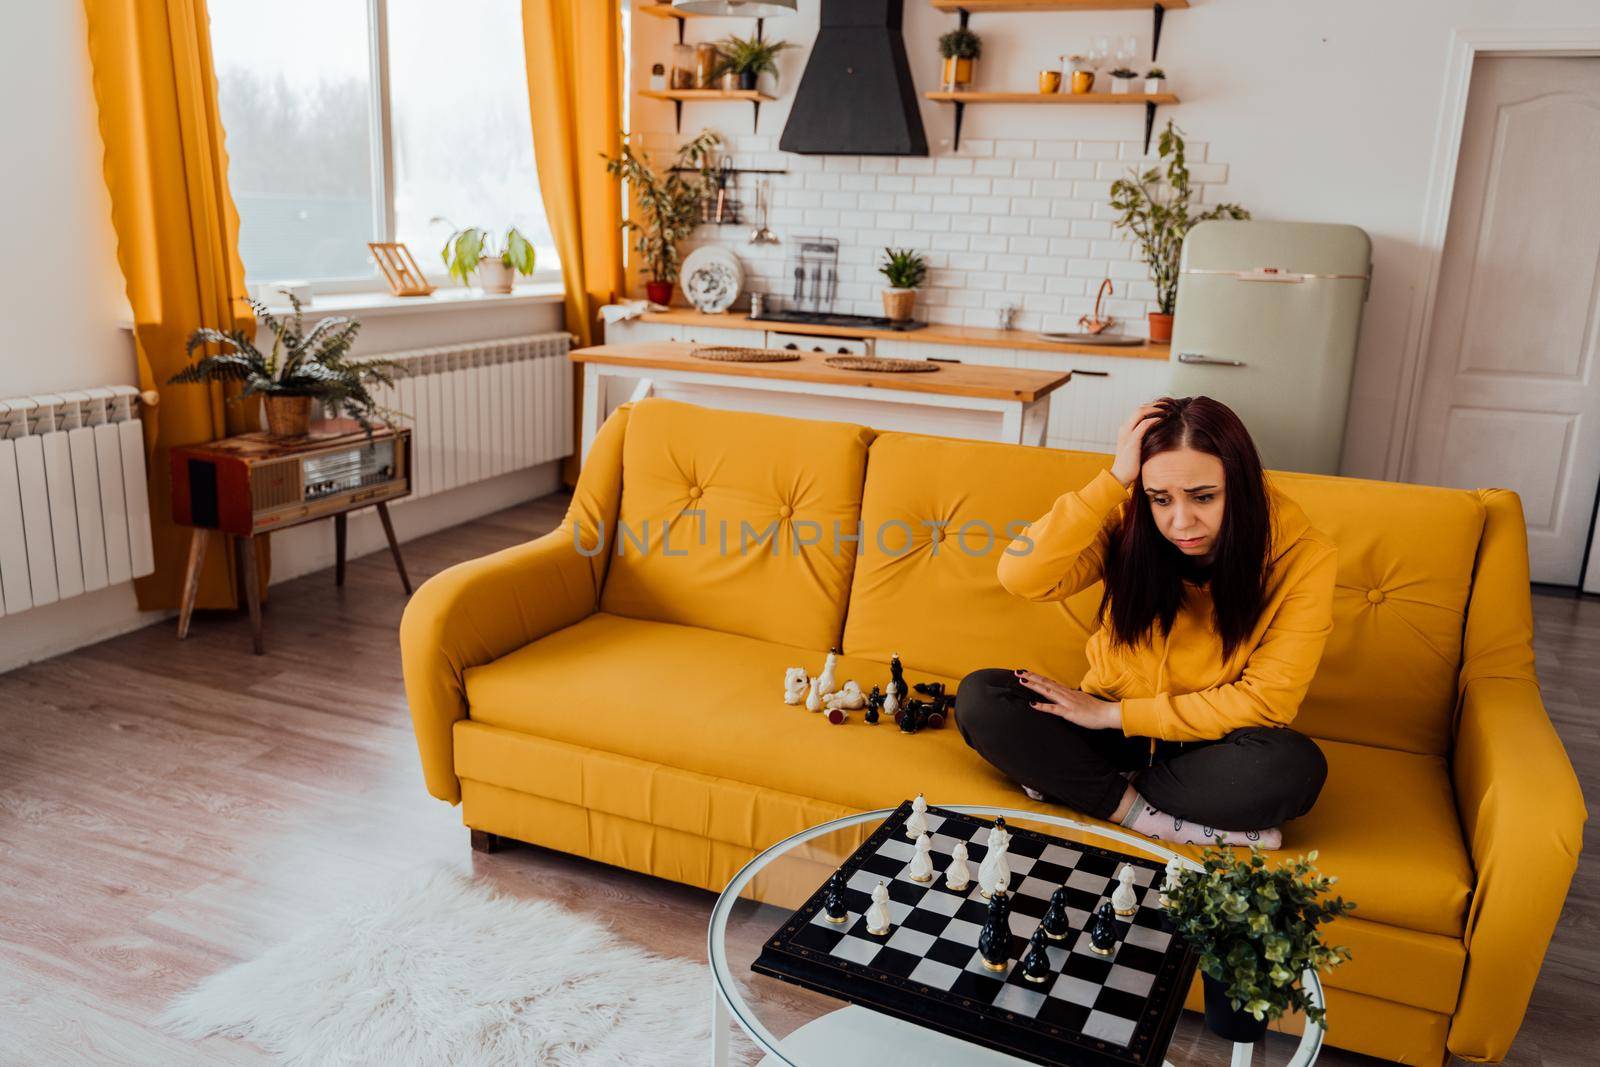 Young upset woman playing chess sitting on sofa. Distressed female plays in logical board game with herself in room